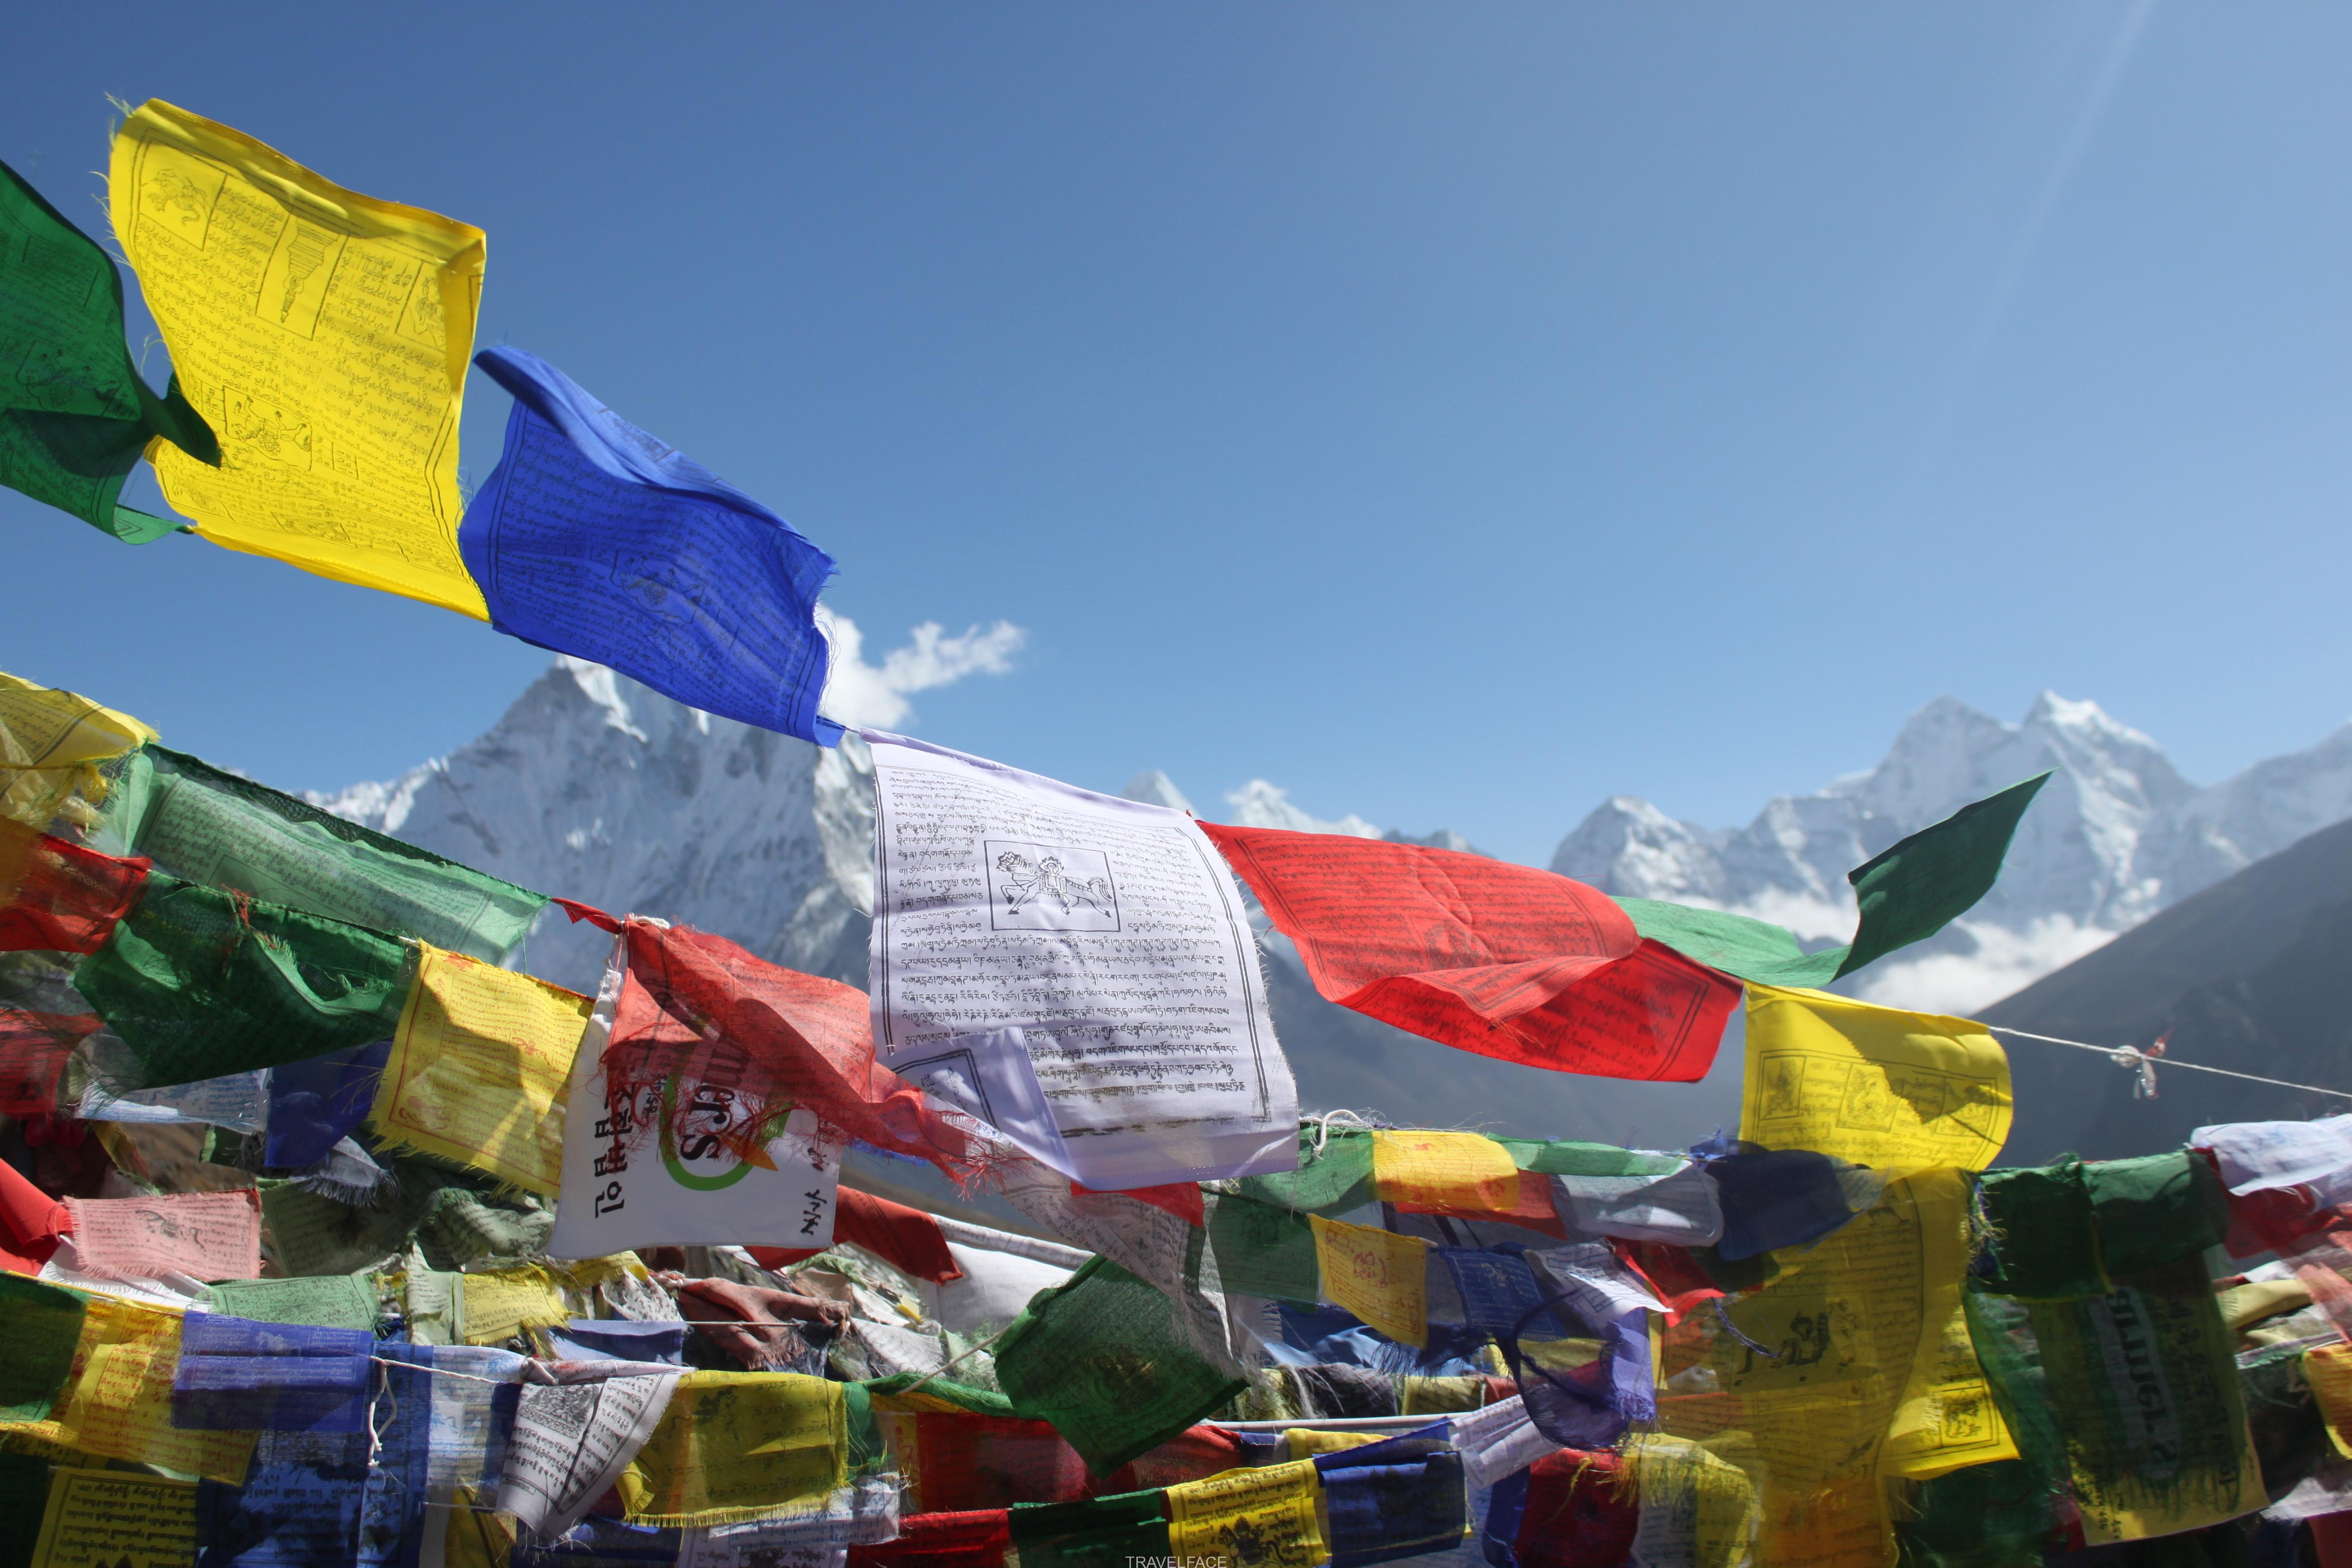 Prayer flags blowing in the wind